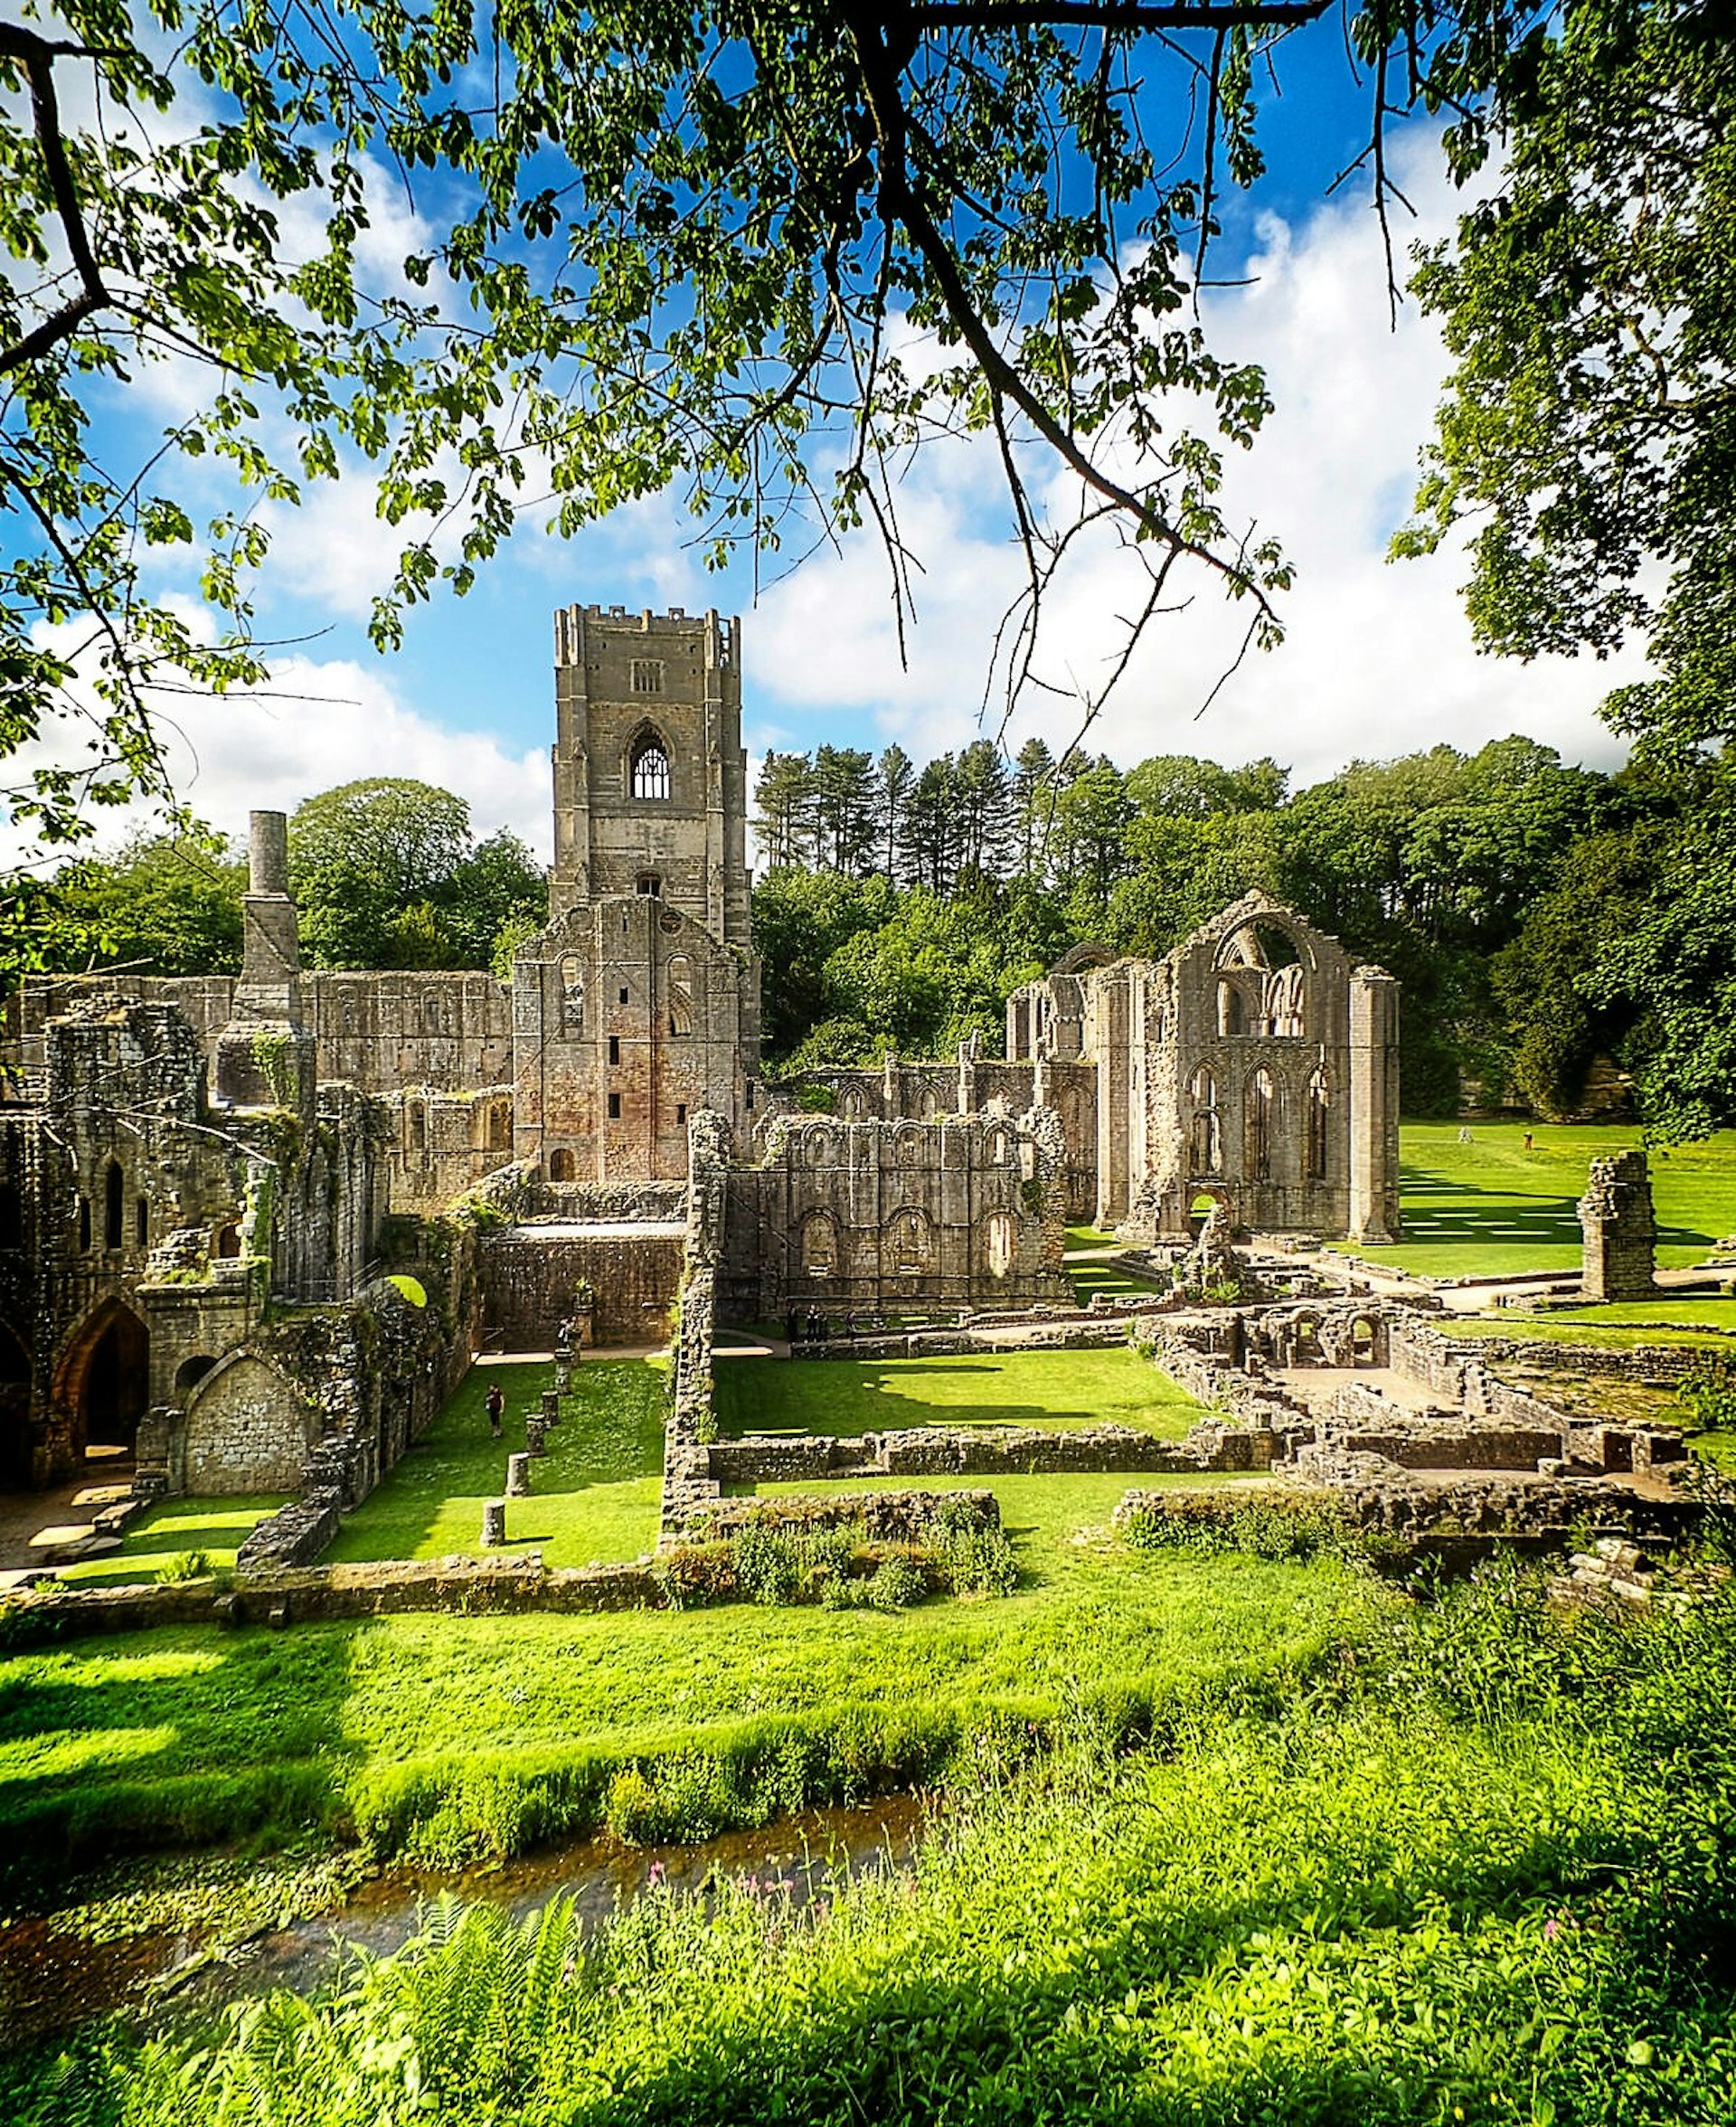 The ruins of Fountains Abbey are set within a wooded valley.